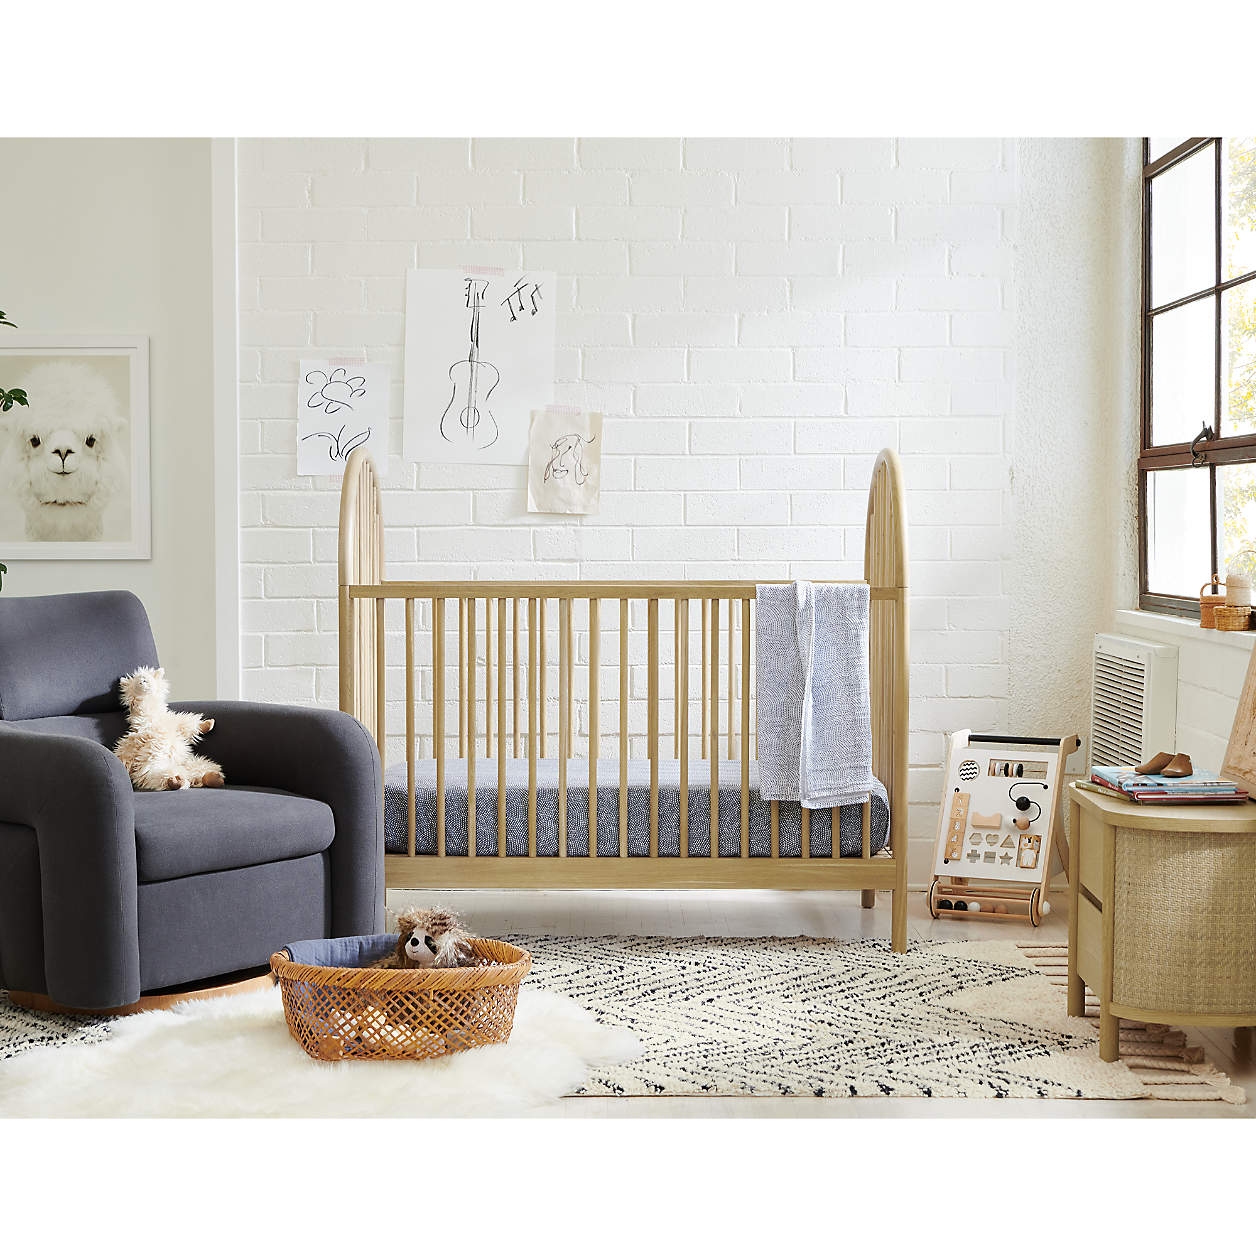 Canyon Natural Spindle Wood Convertible Baby Crib by Leanne Ford - Image 7